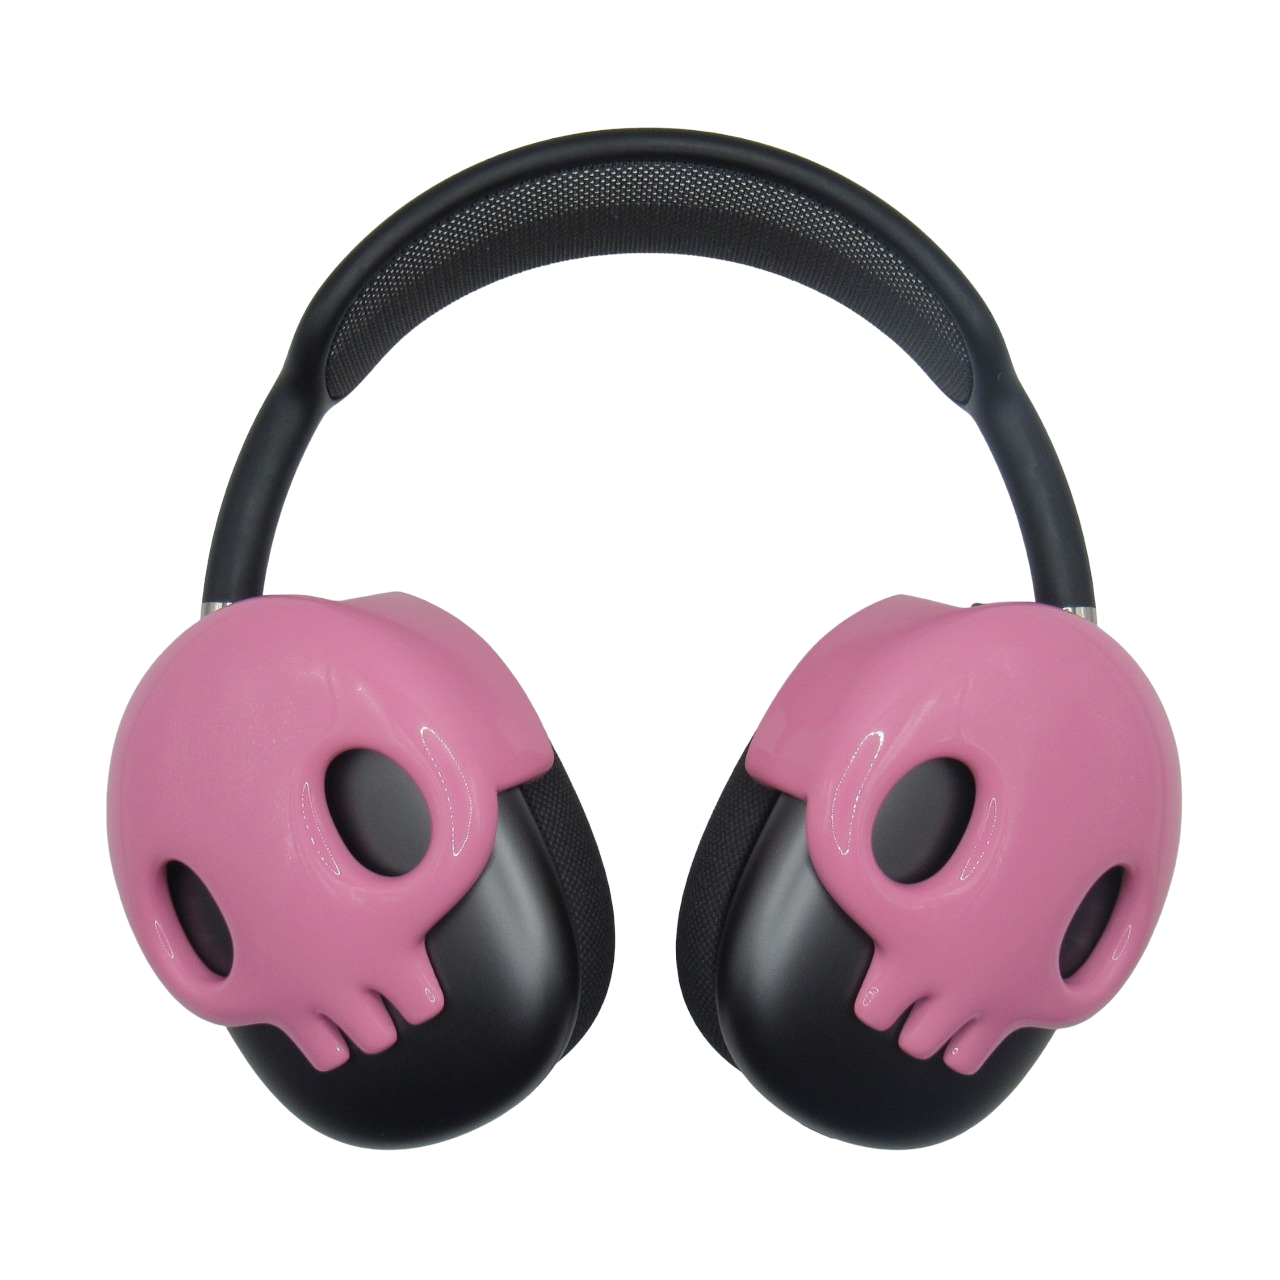 Kuromi AirPods Max attachments – in my meadow